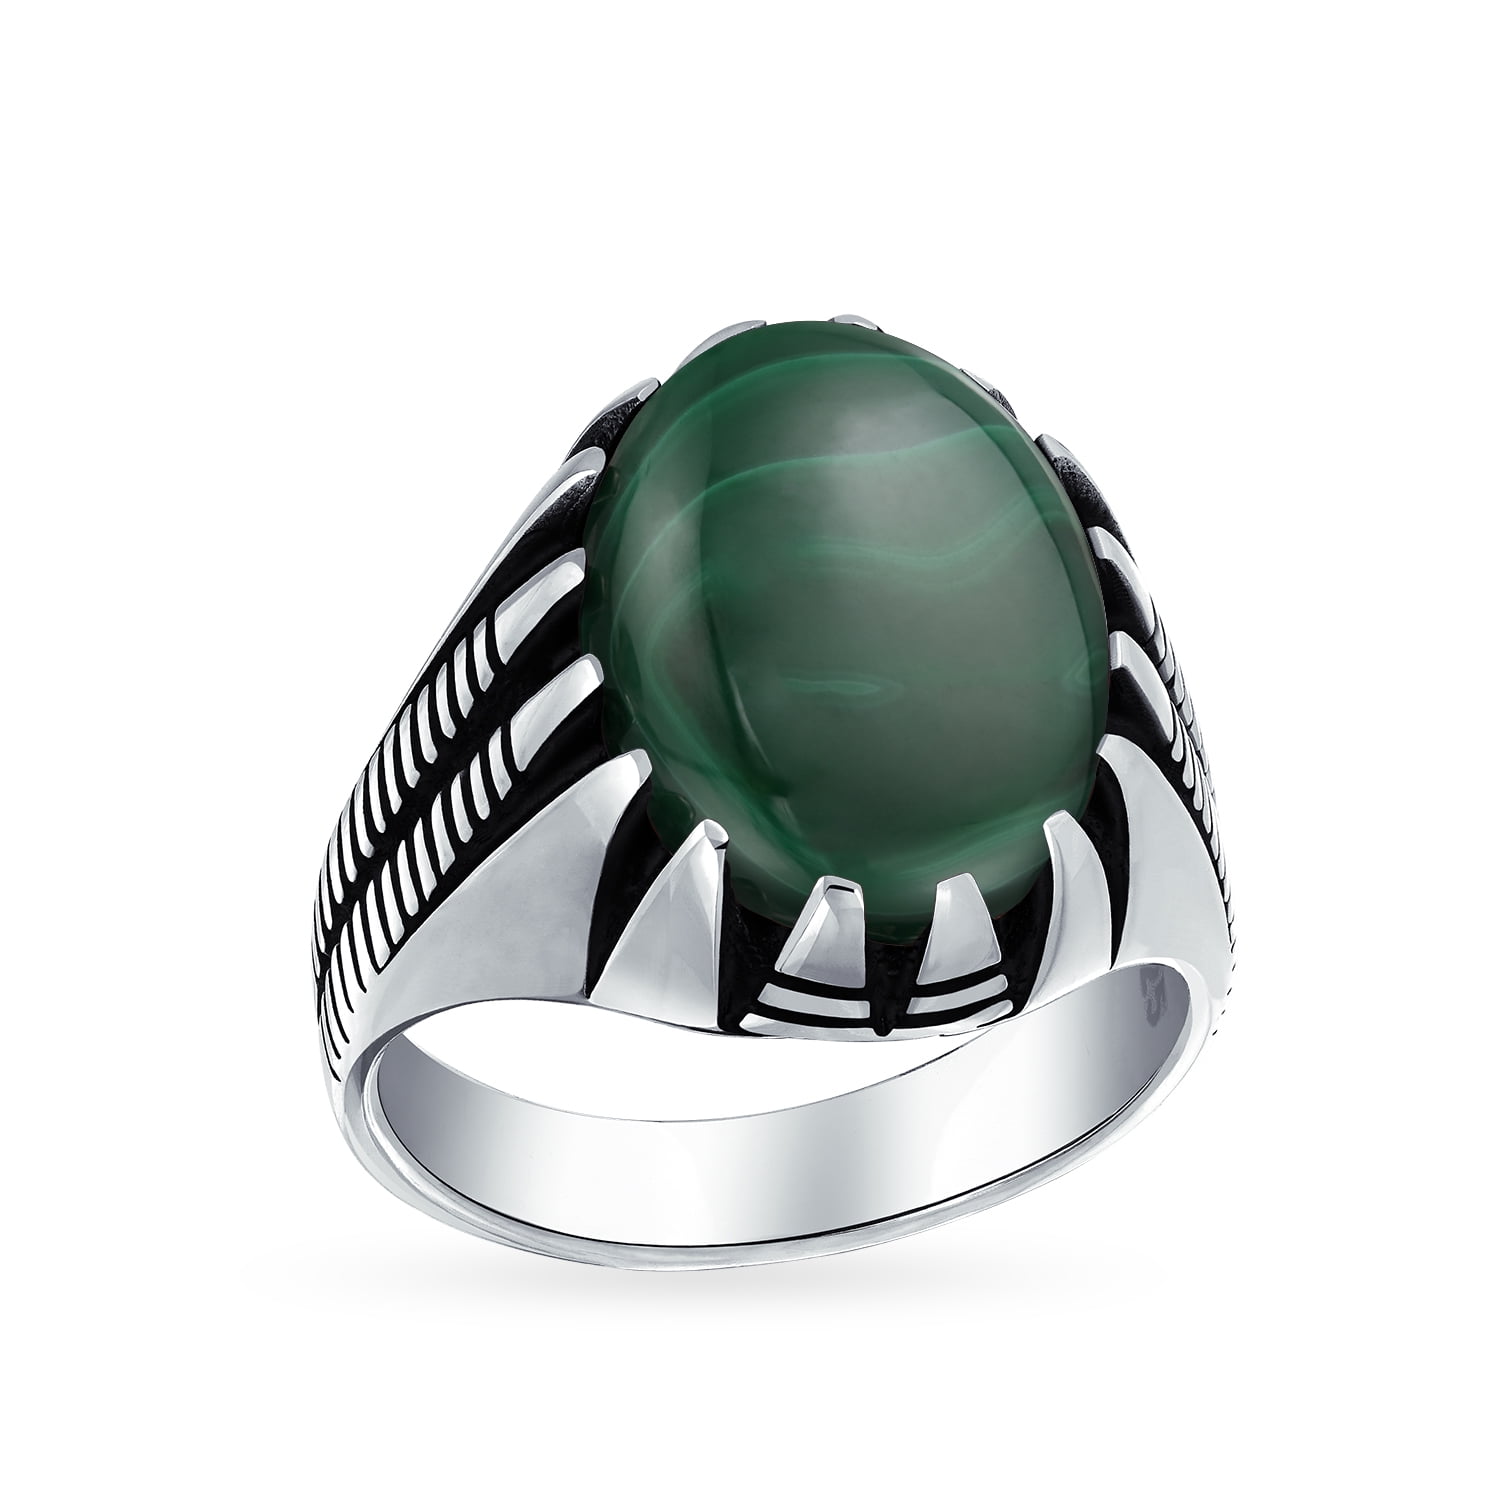 SOLID STERLING 925 SILVER HANDMADE JEWELRY ELEGANT EMERALD CLAW MEN'S RING 